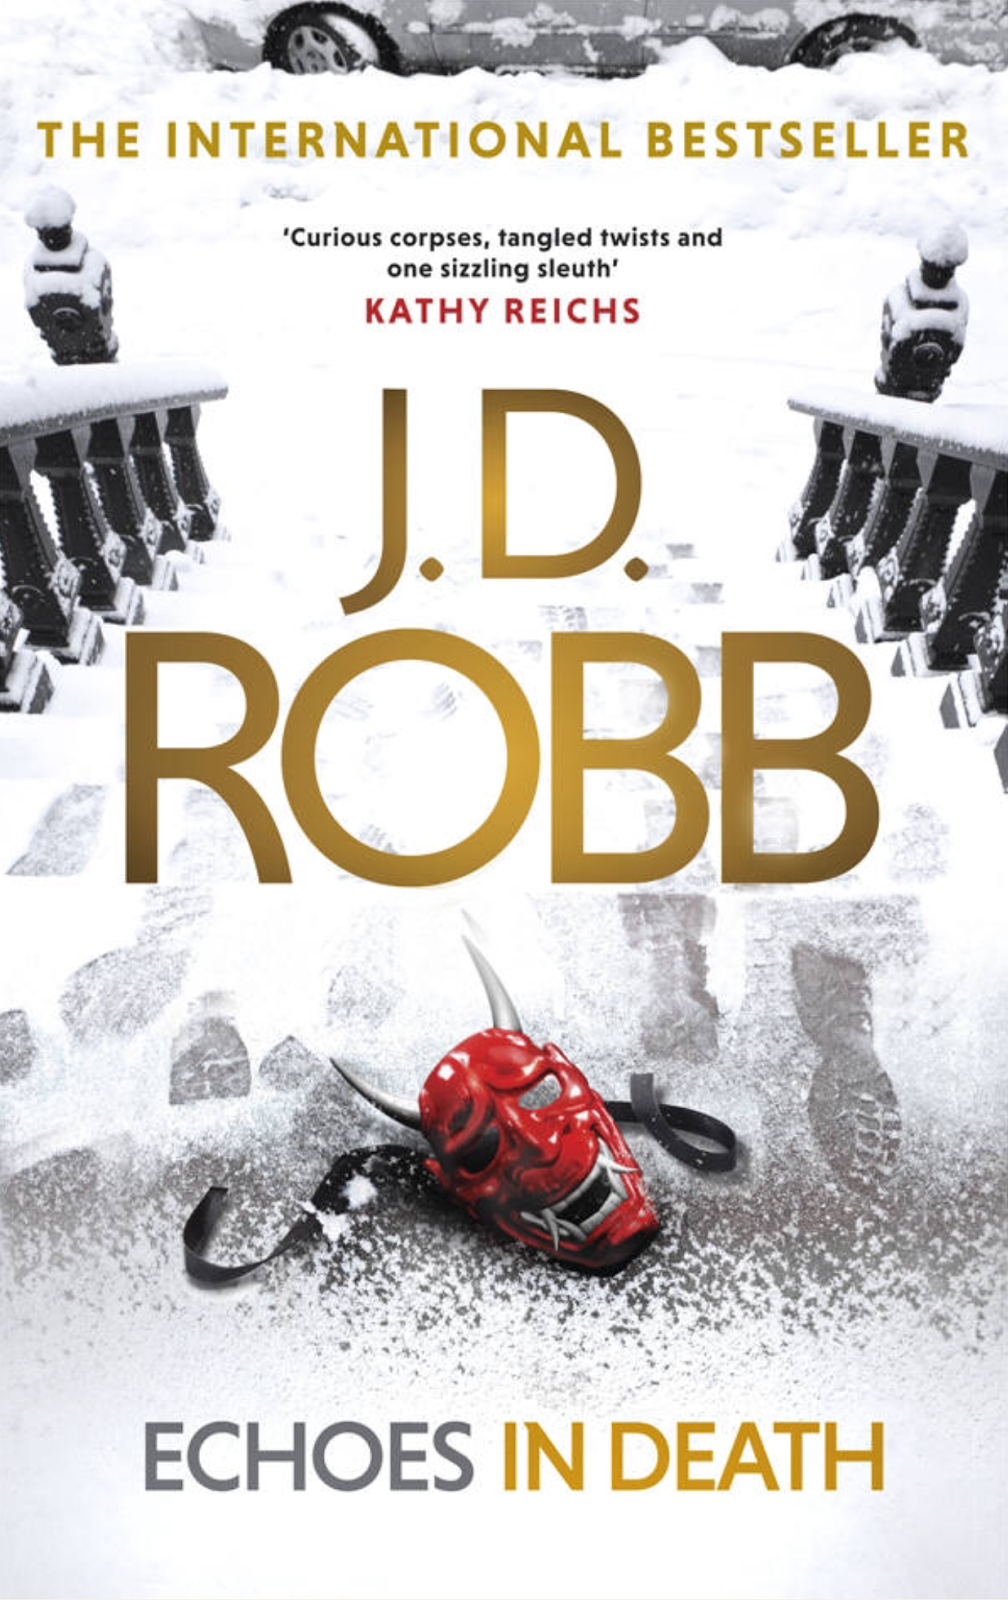 ECHOES IN DEATH by JD Robb